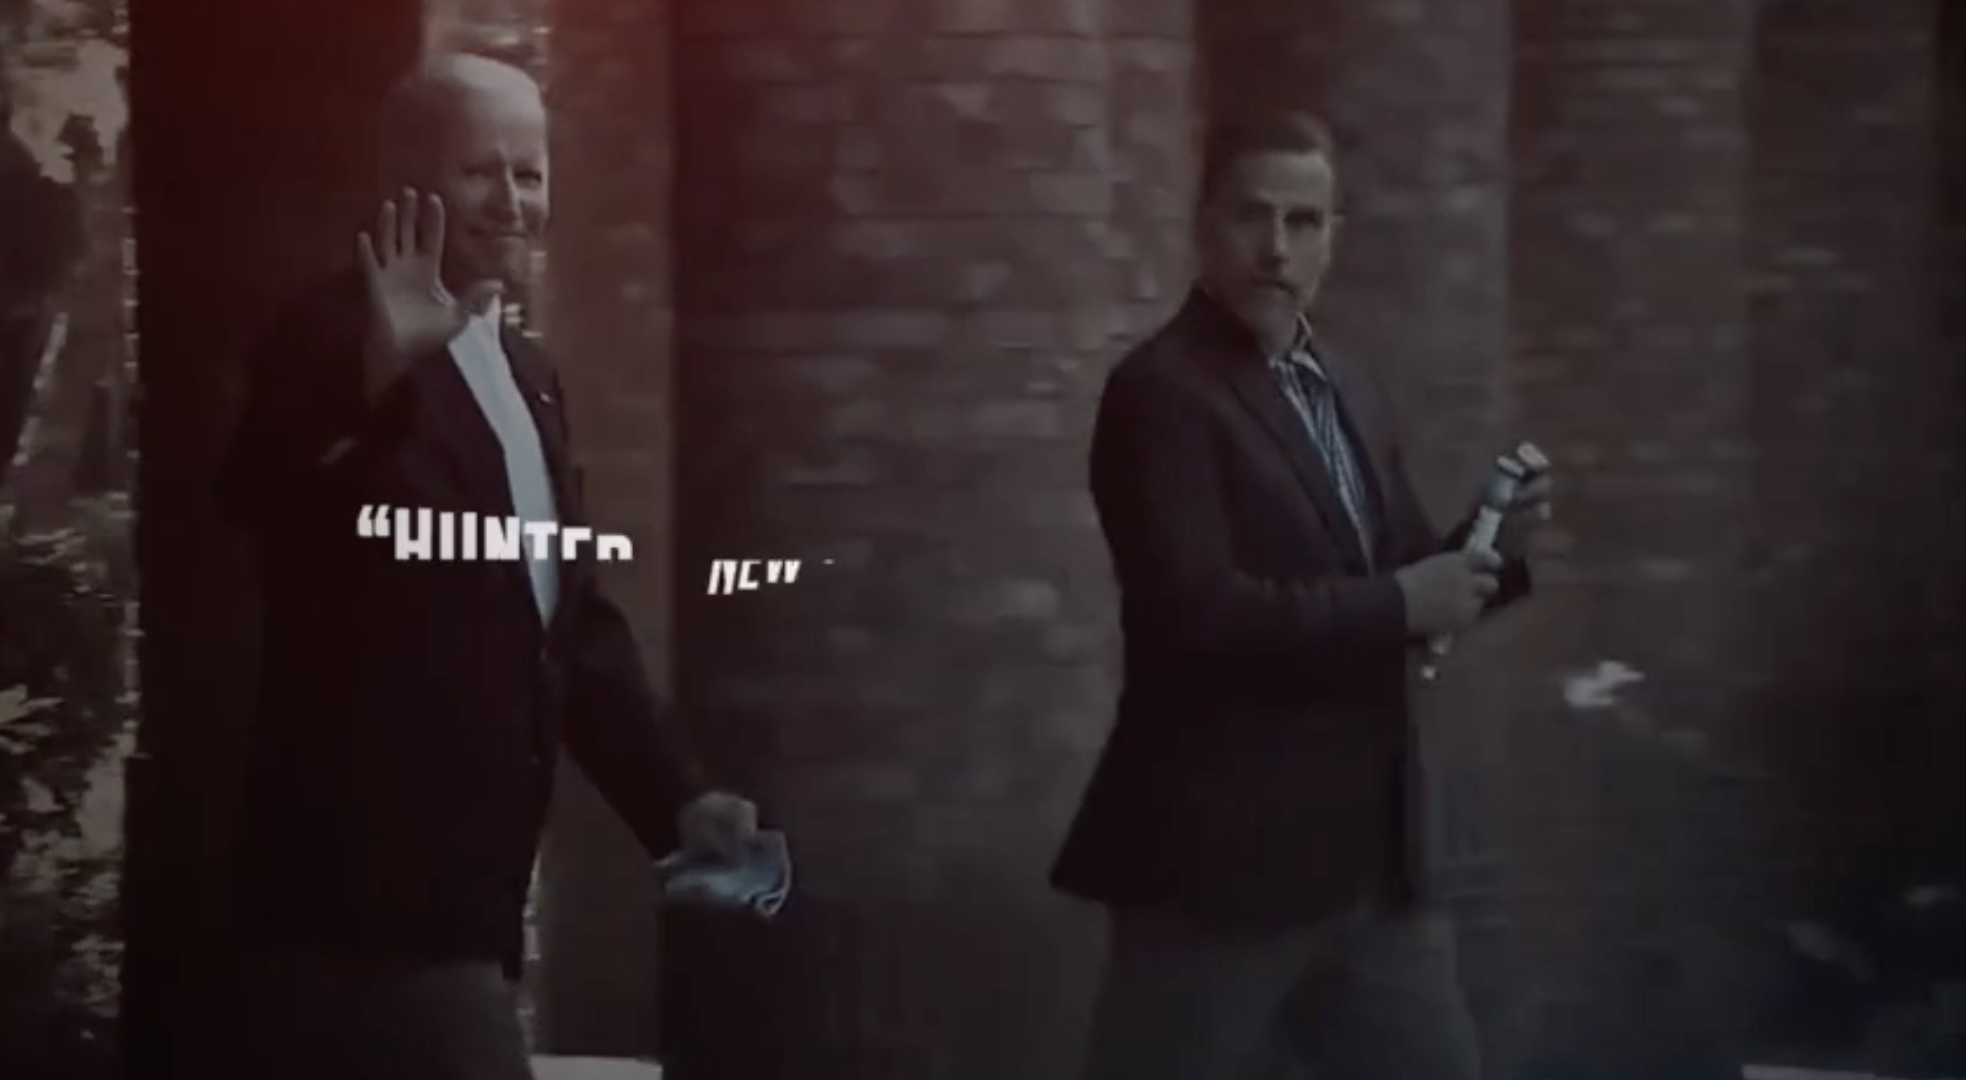 New Ad from Trump Super PAC Hammers Biden Crime Family (VIDEO INSIDE)